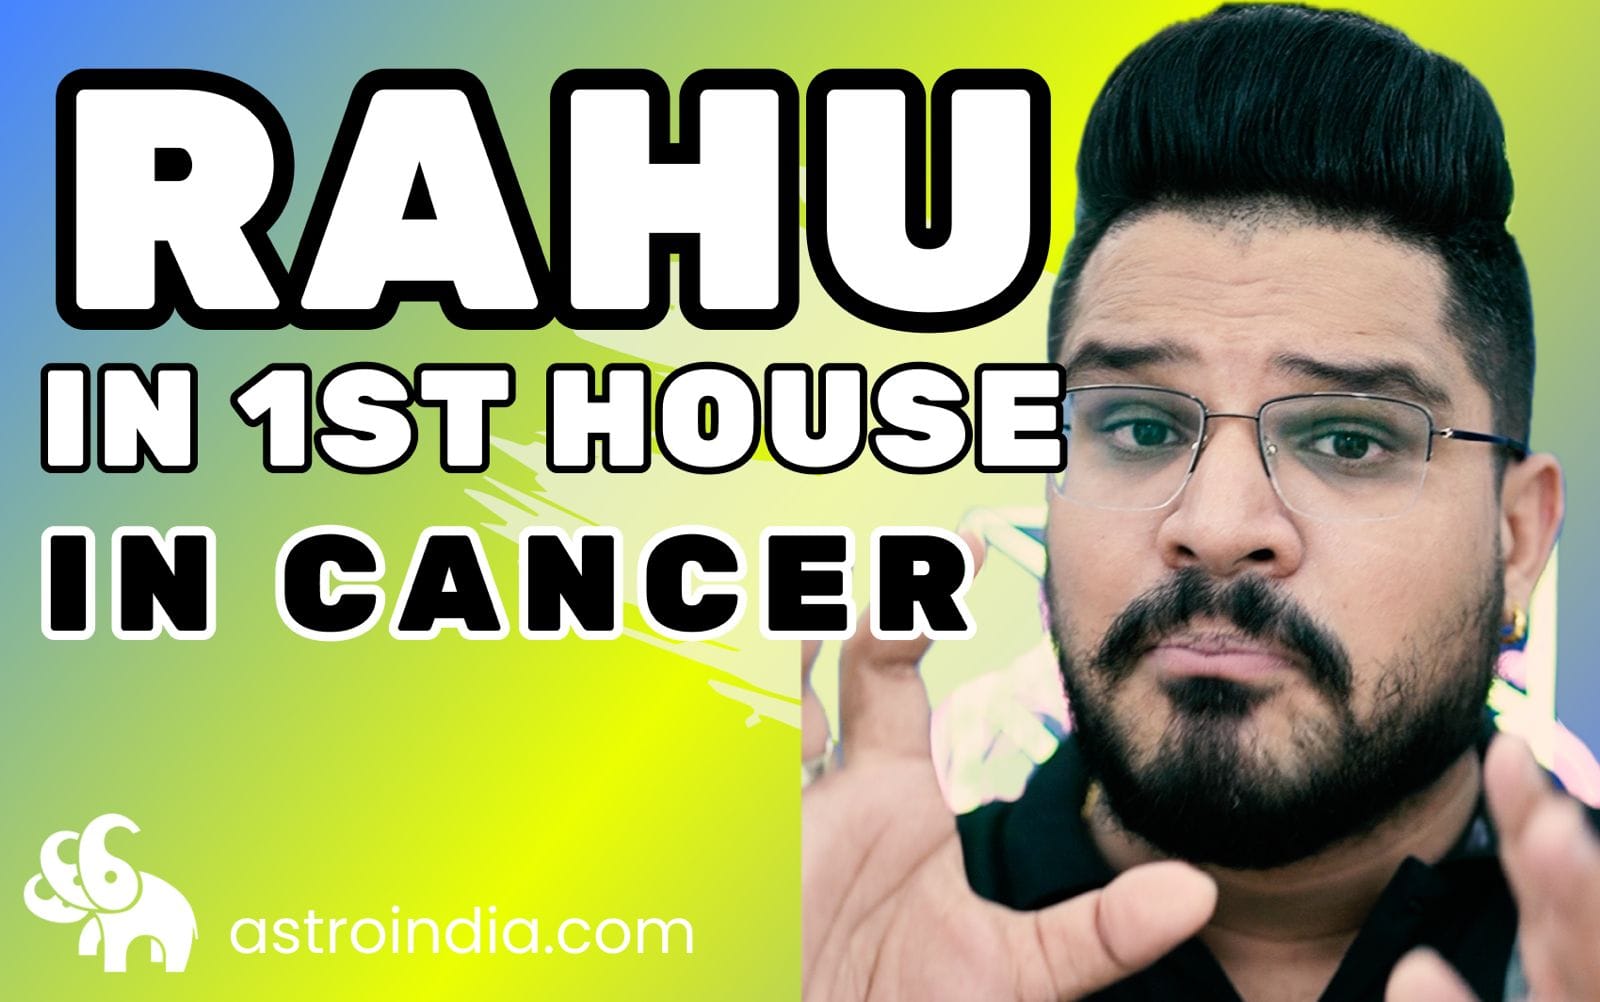 Rahu in 1st House in Cancer